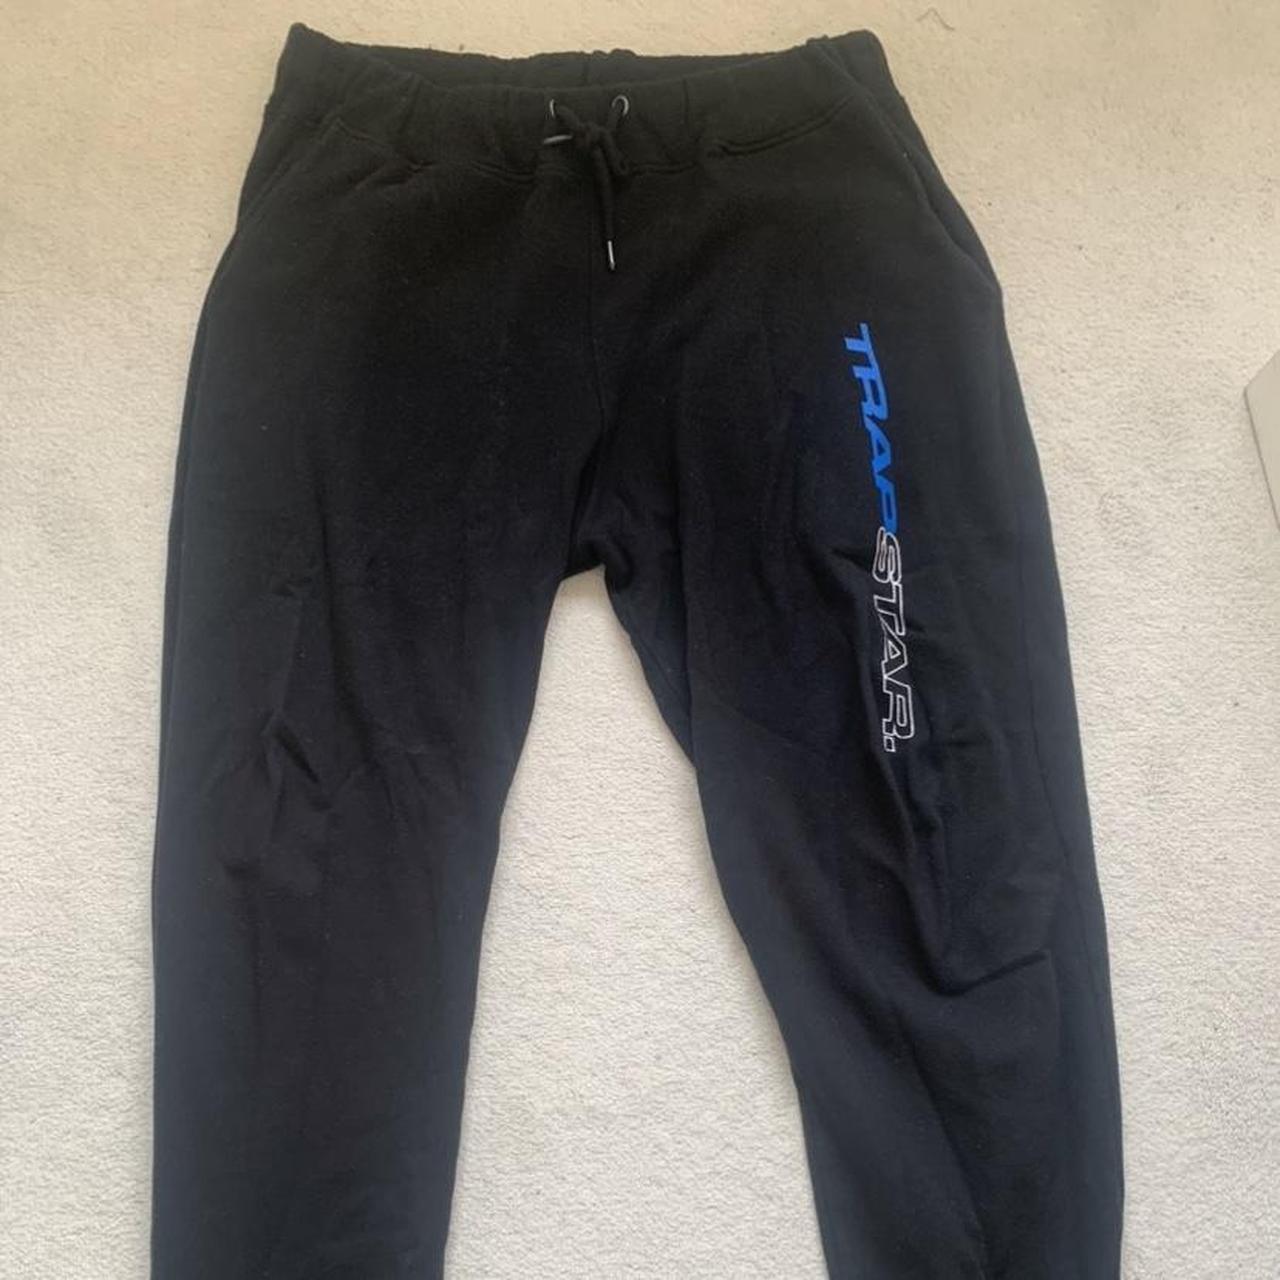 Trapstar Men's Black and Blue Joggers-tracksuits | Depop